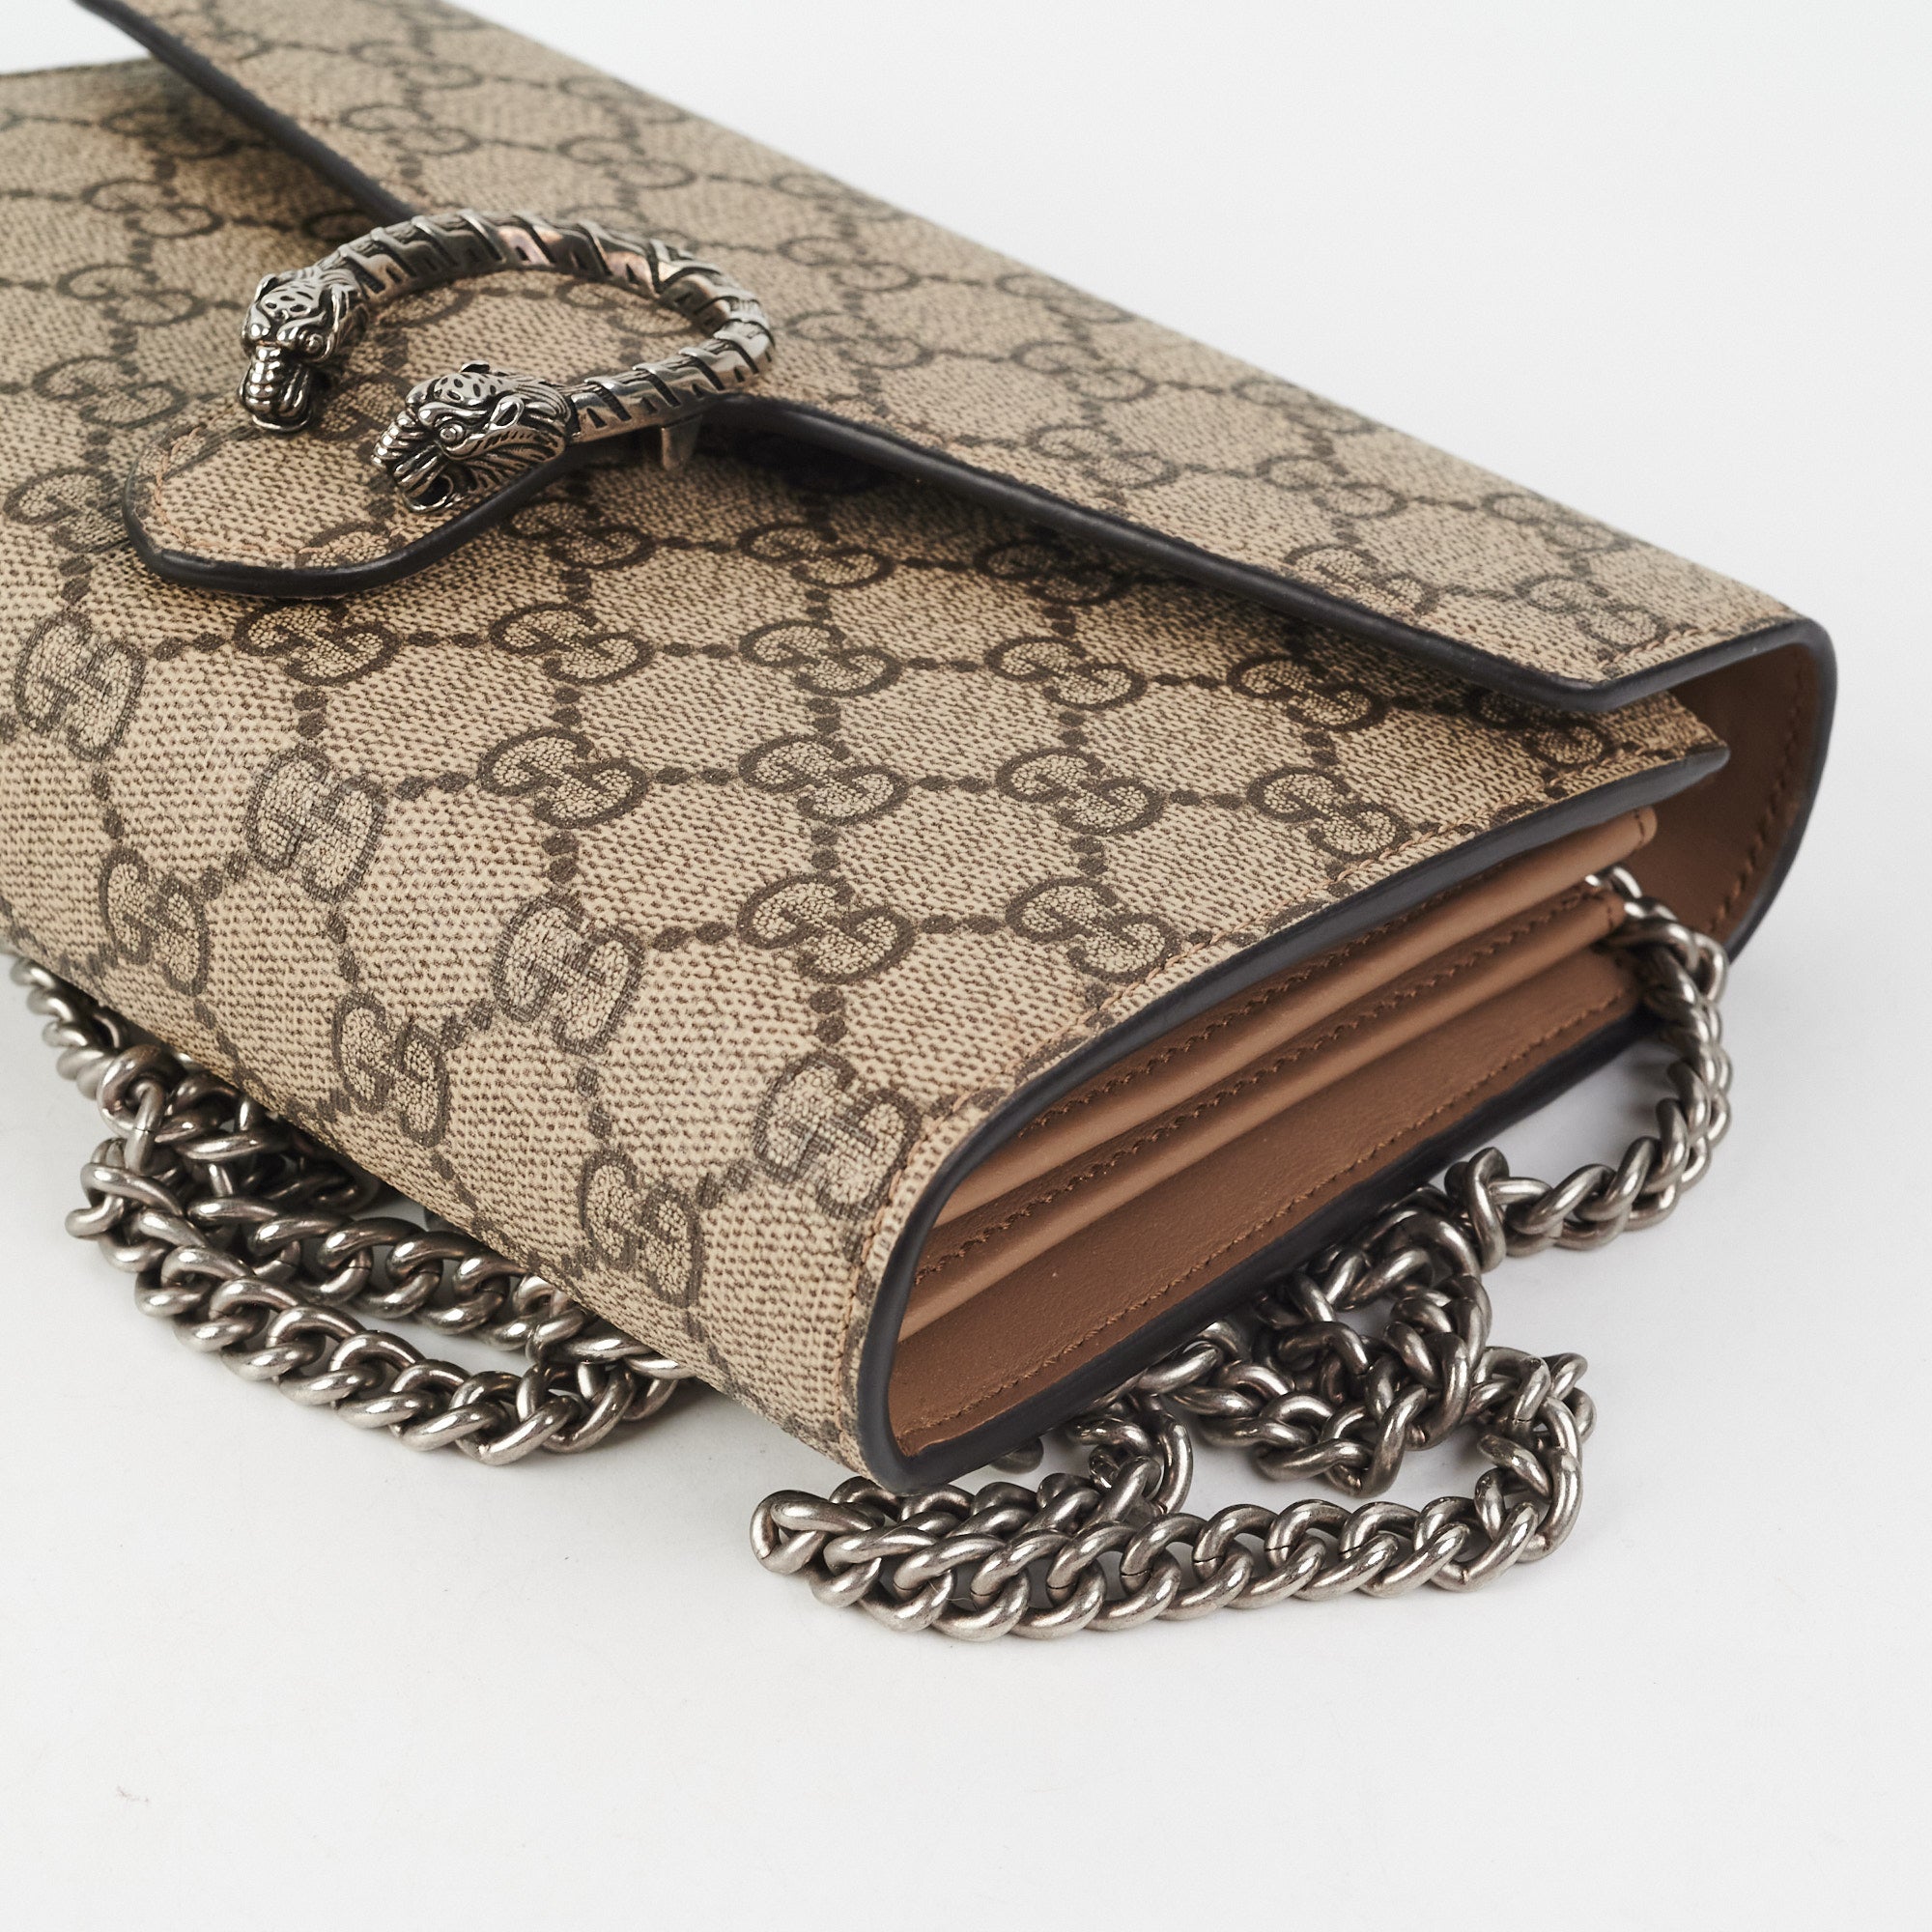 17 Gucci Dionysus GG Supreme Wallet On Chain ideas  gucci dionysus, gucci,  dionysus gg supreme chain wallet